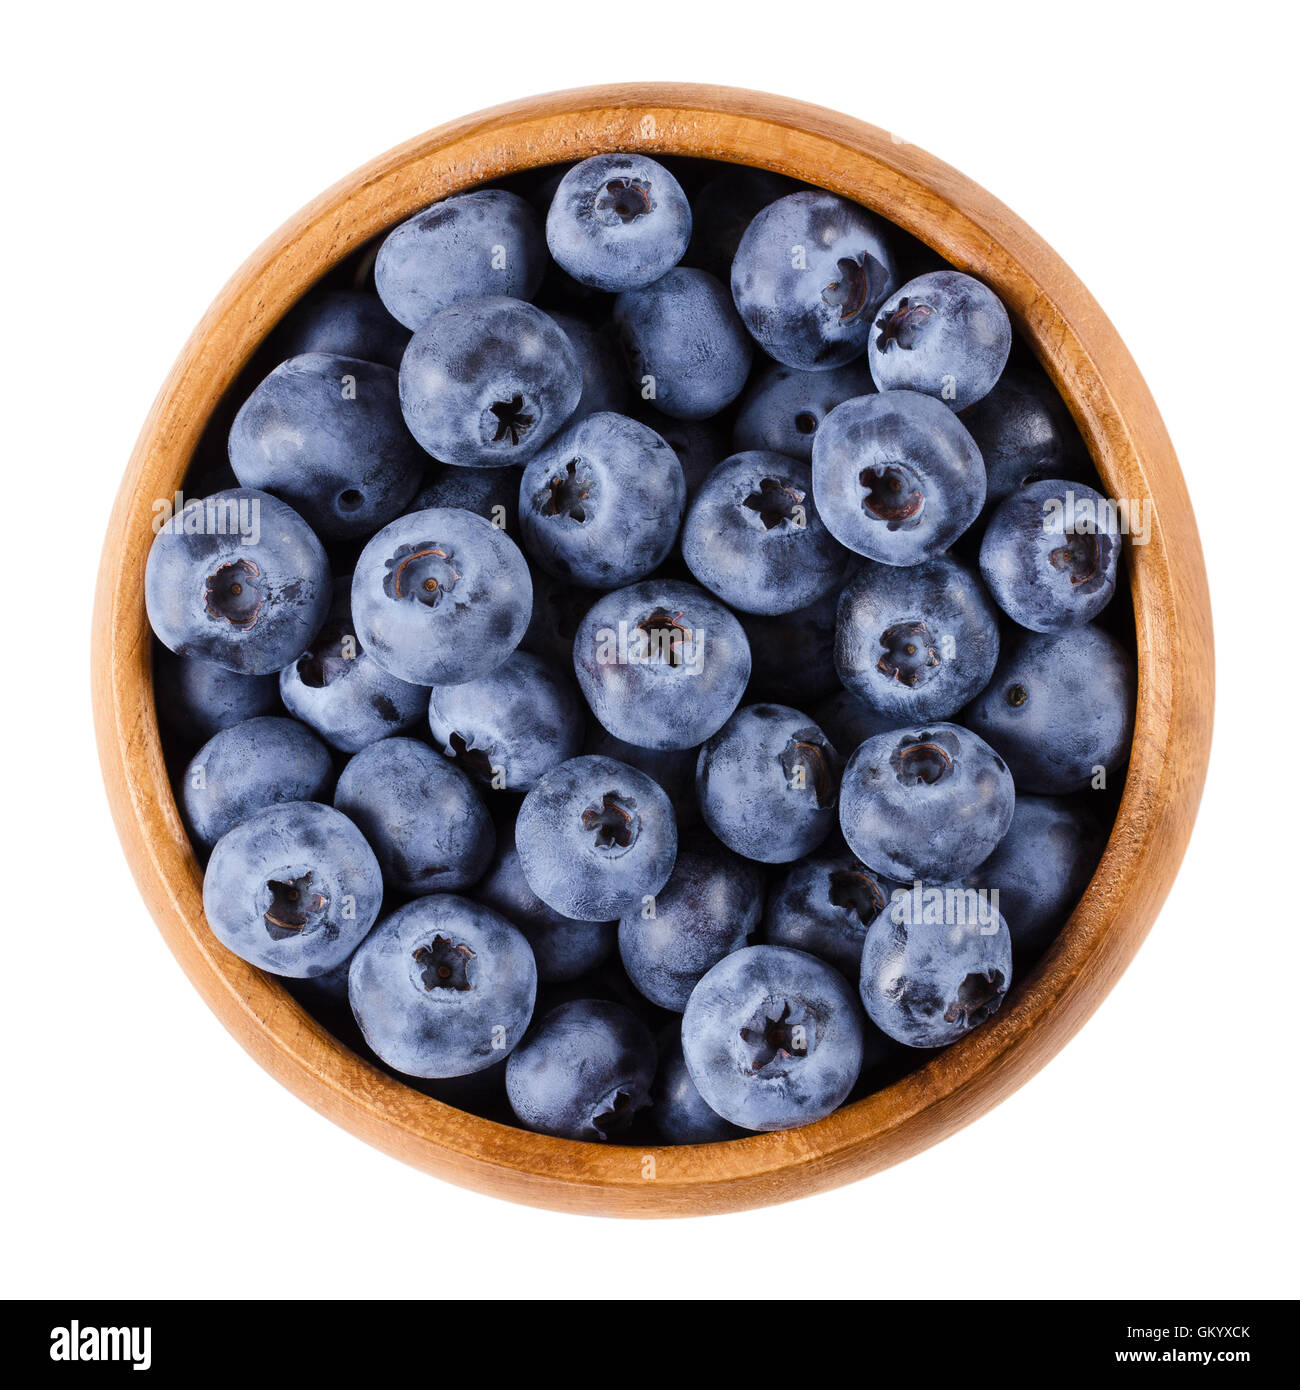 Blueberries in a wooden bowl on white background. Dark purple colored ripe berries of Vaccinium corymbosum. Edible fruits. Stock Photo